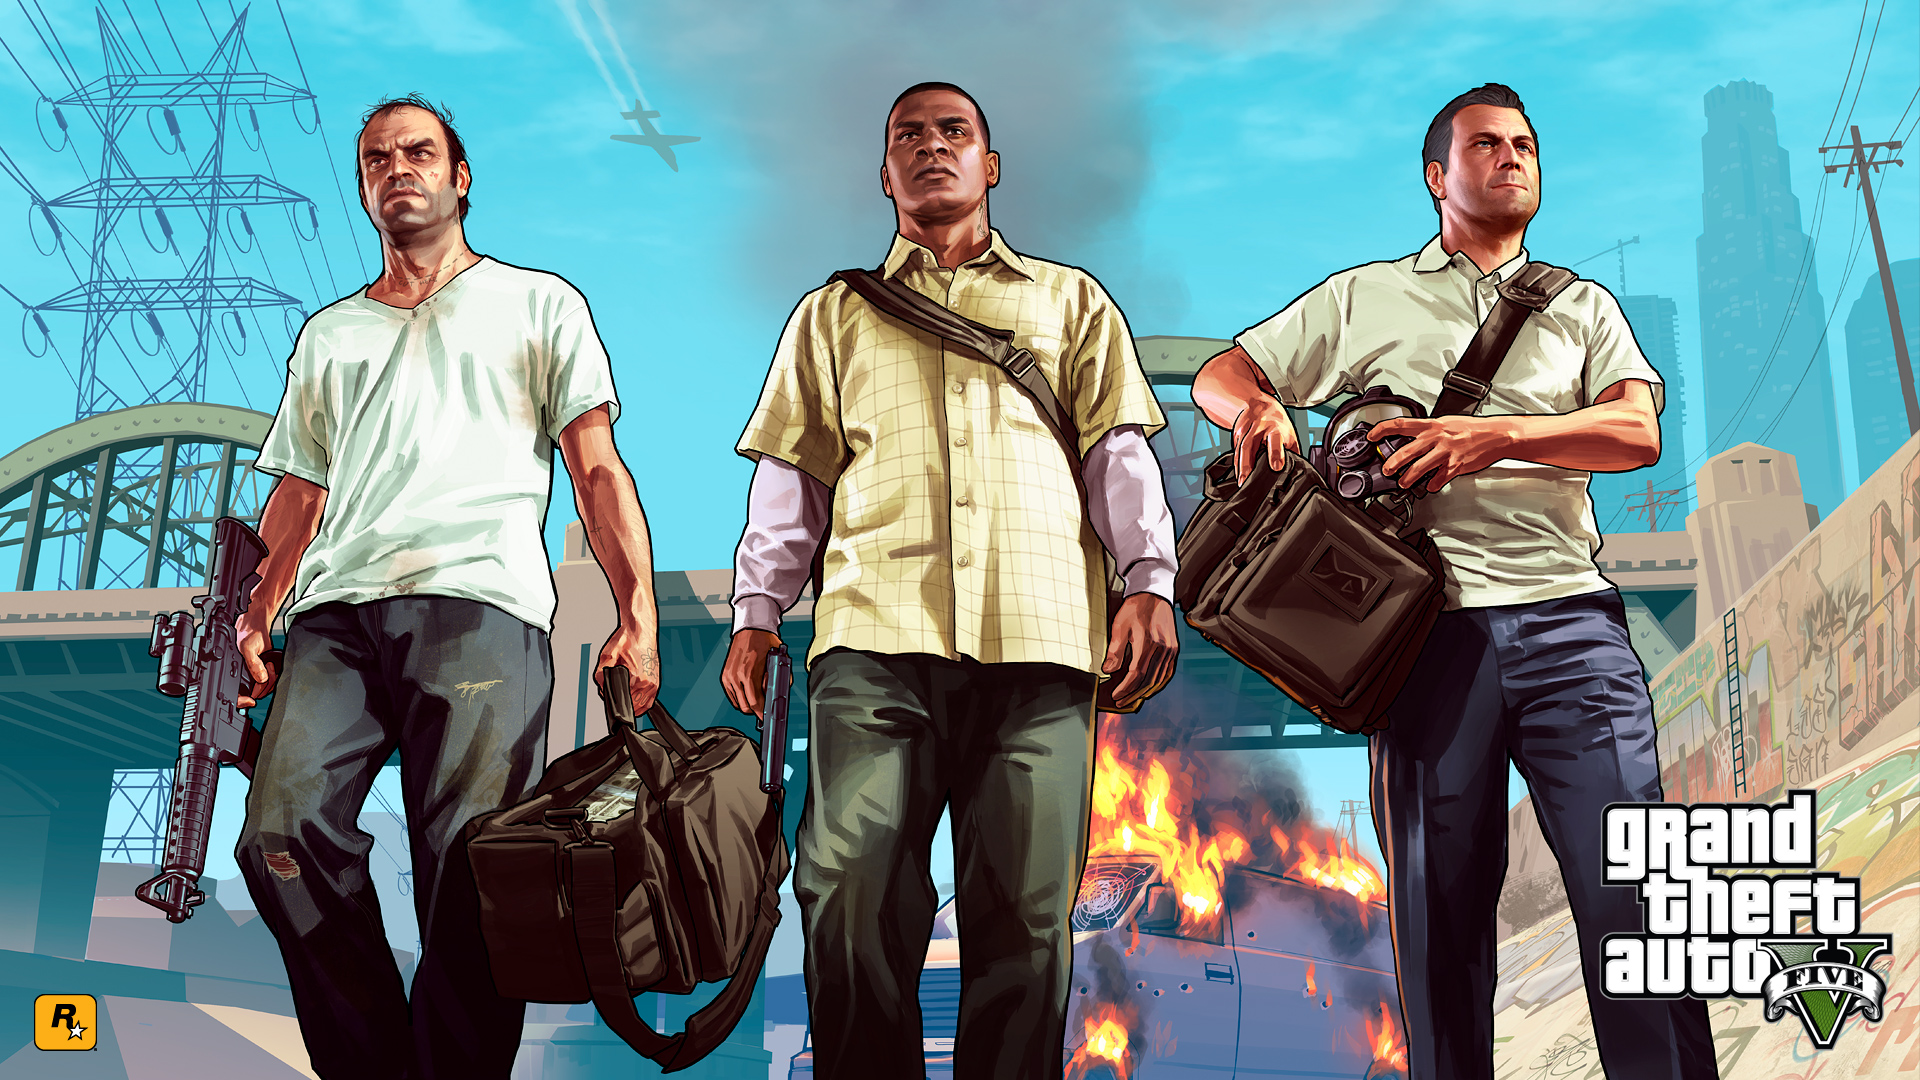 Grand Theft Auto 5 Full HD Wallpaper For Your PC Desktop